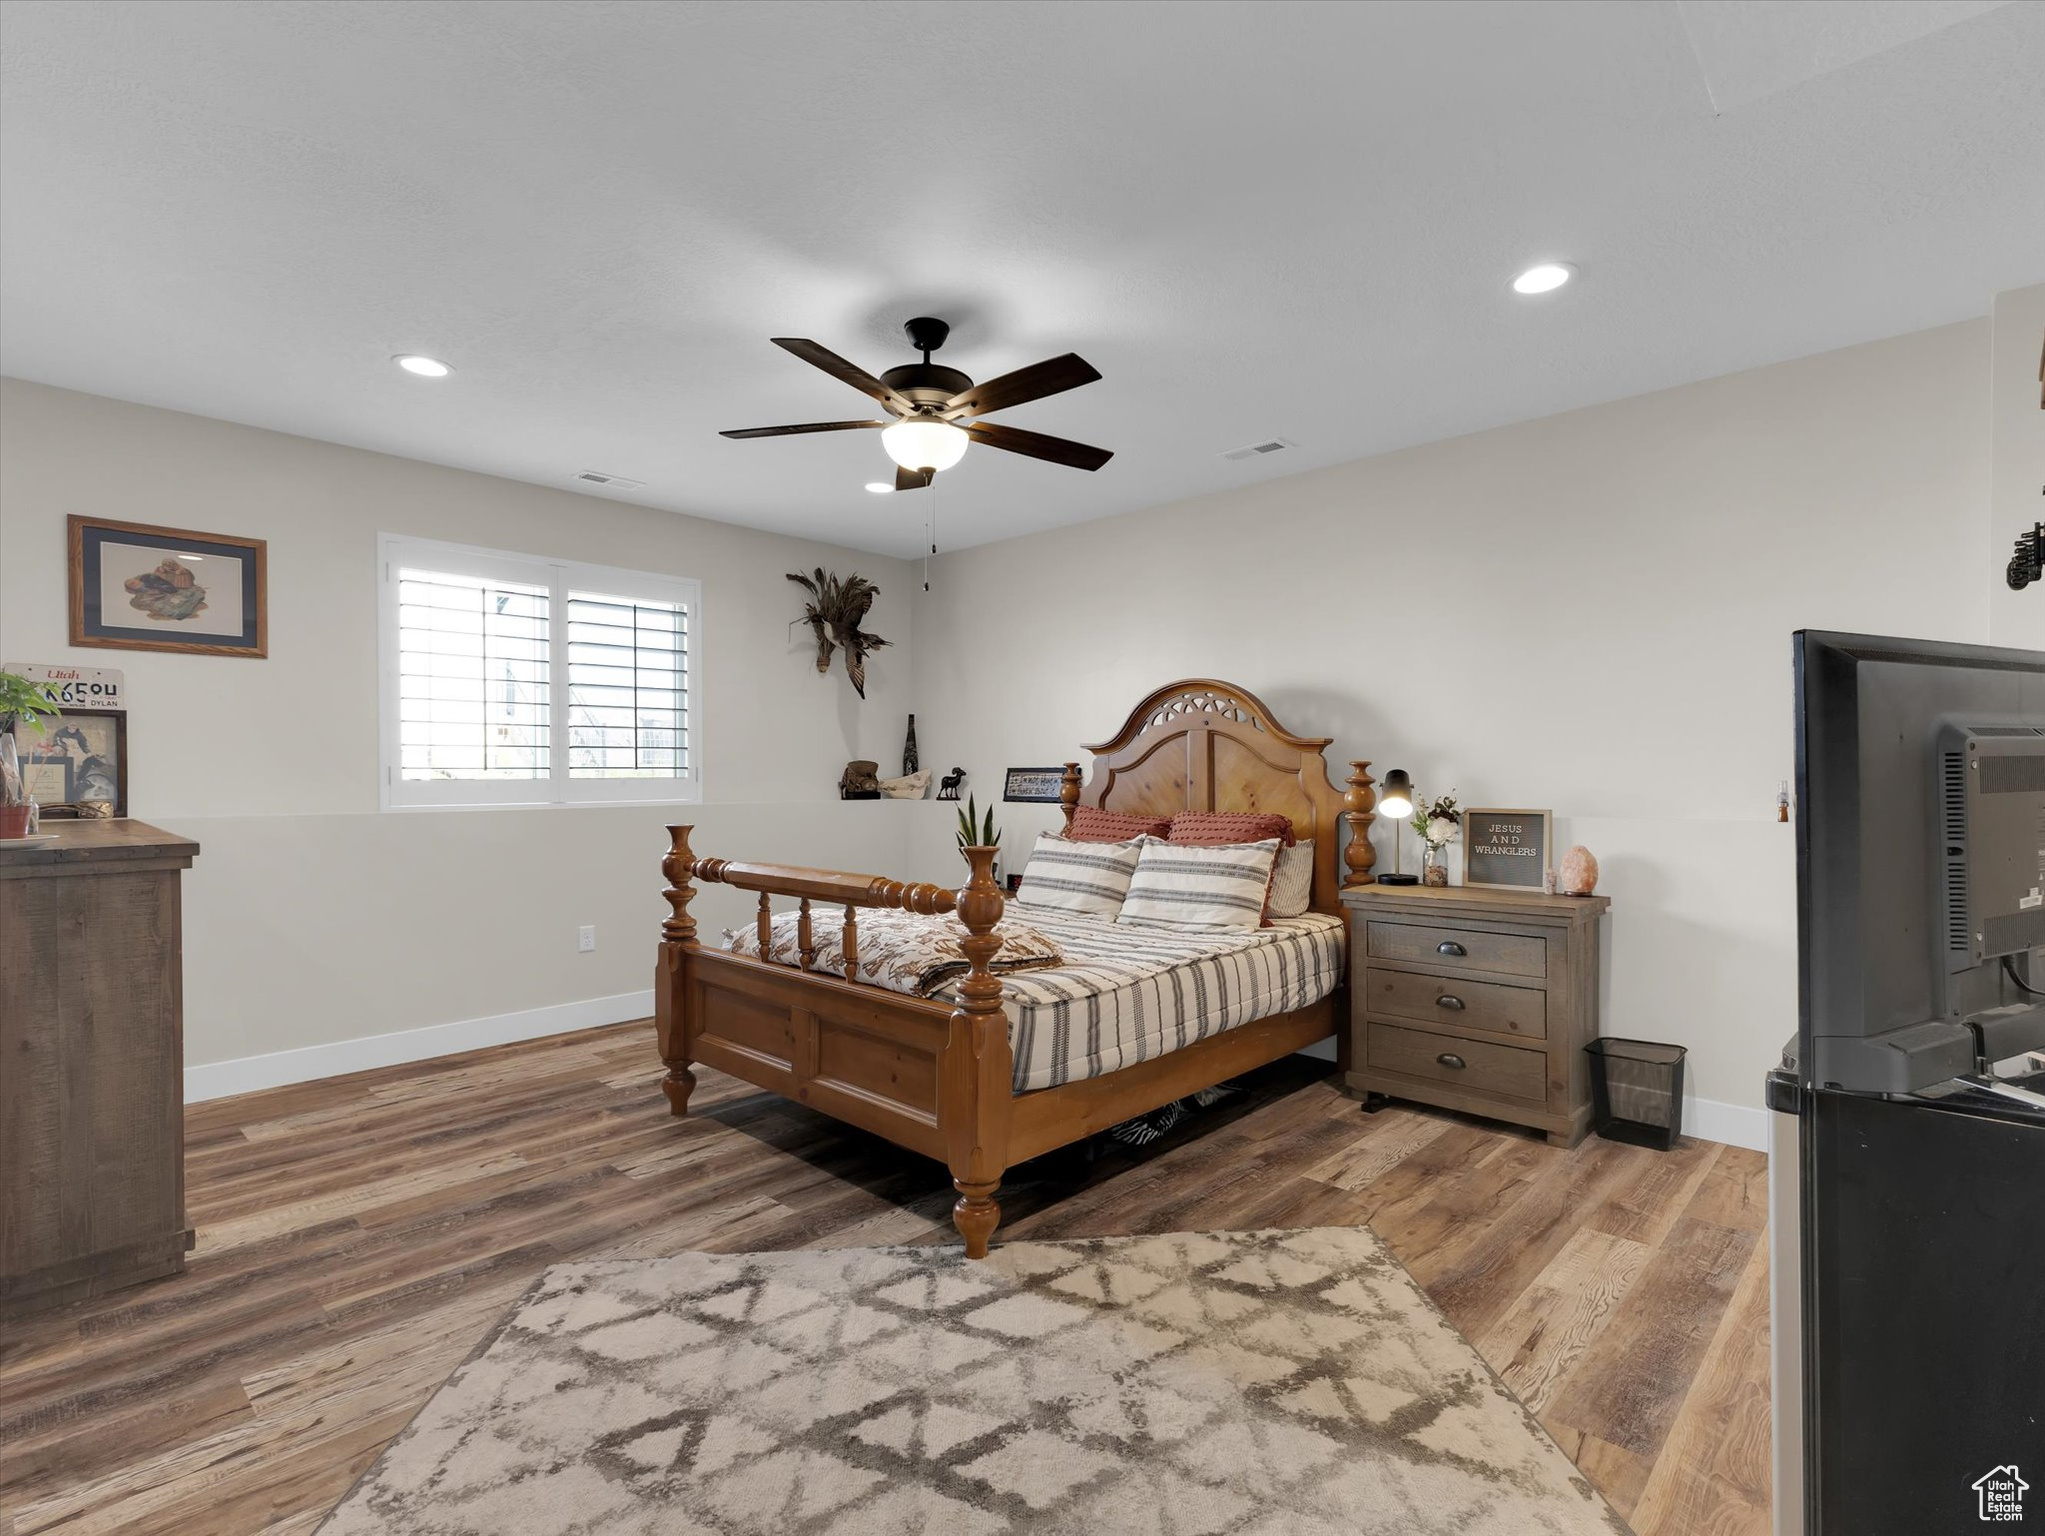 Bedroom #3 with ceiling fan and hardwood / wood-style flooring